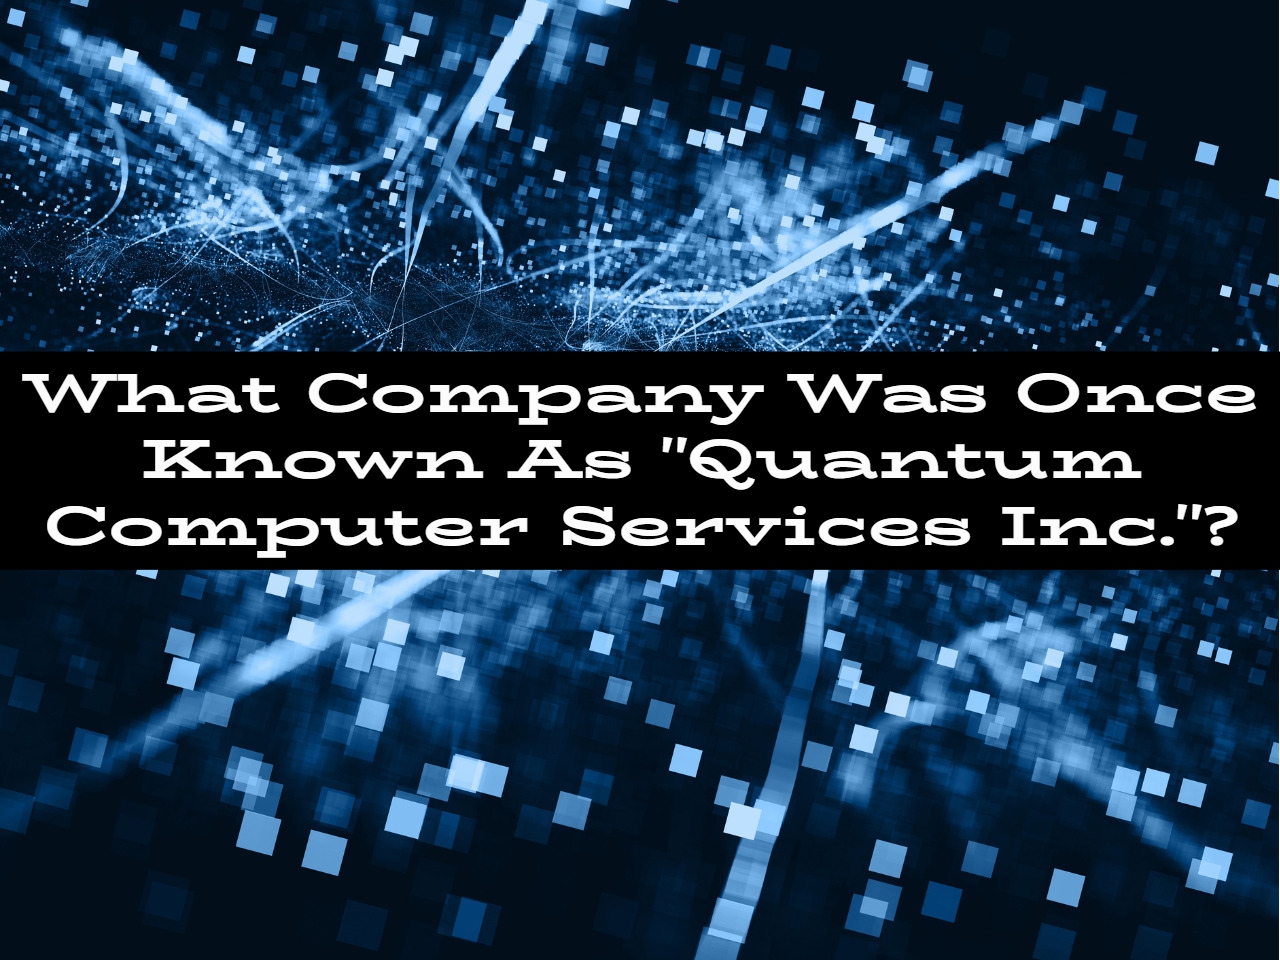 What company was once known as quantum computer services inc.